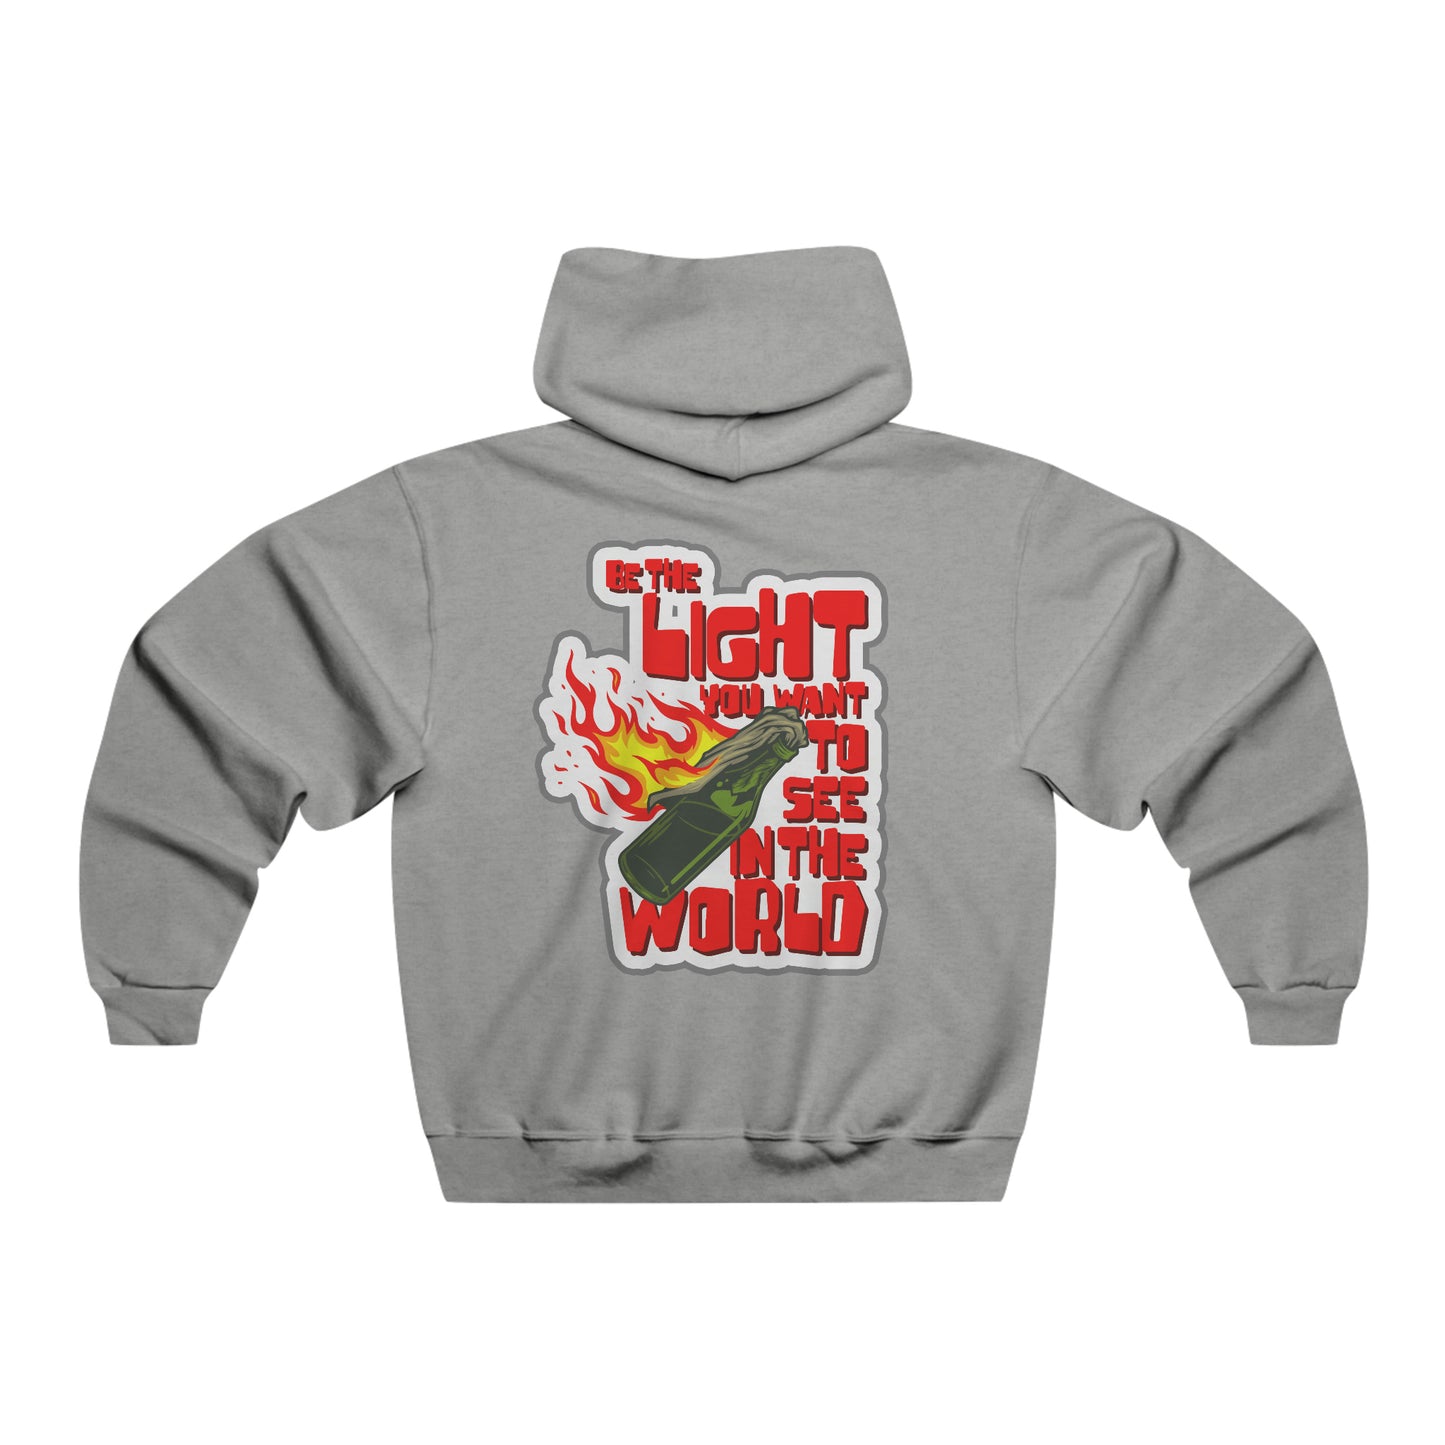 Be the light you want to see in the world - Hooded Sweatshirt